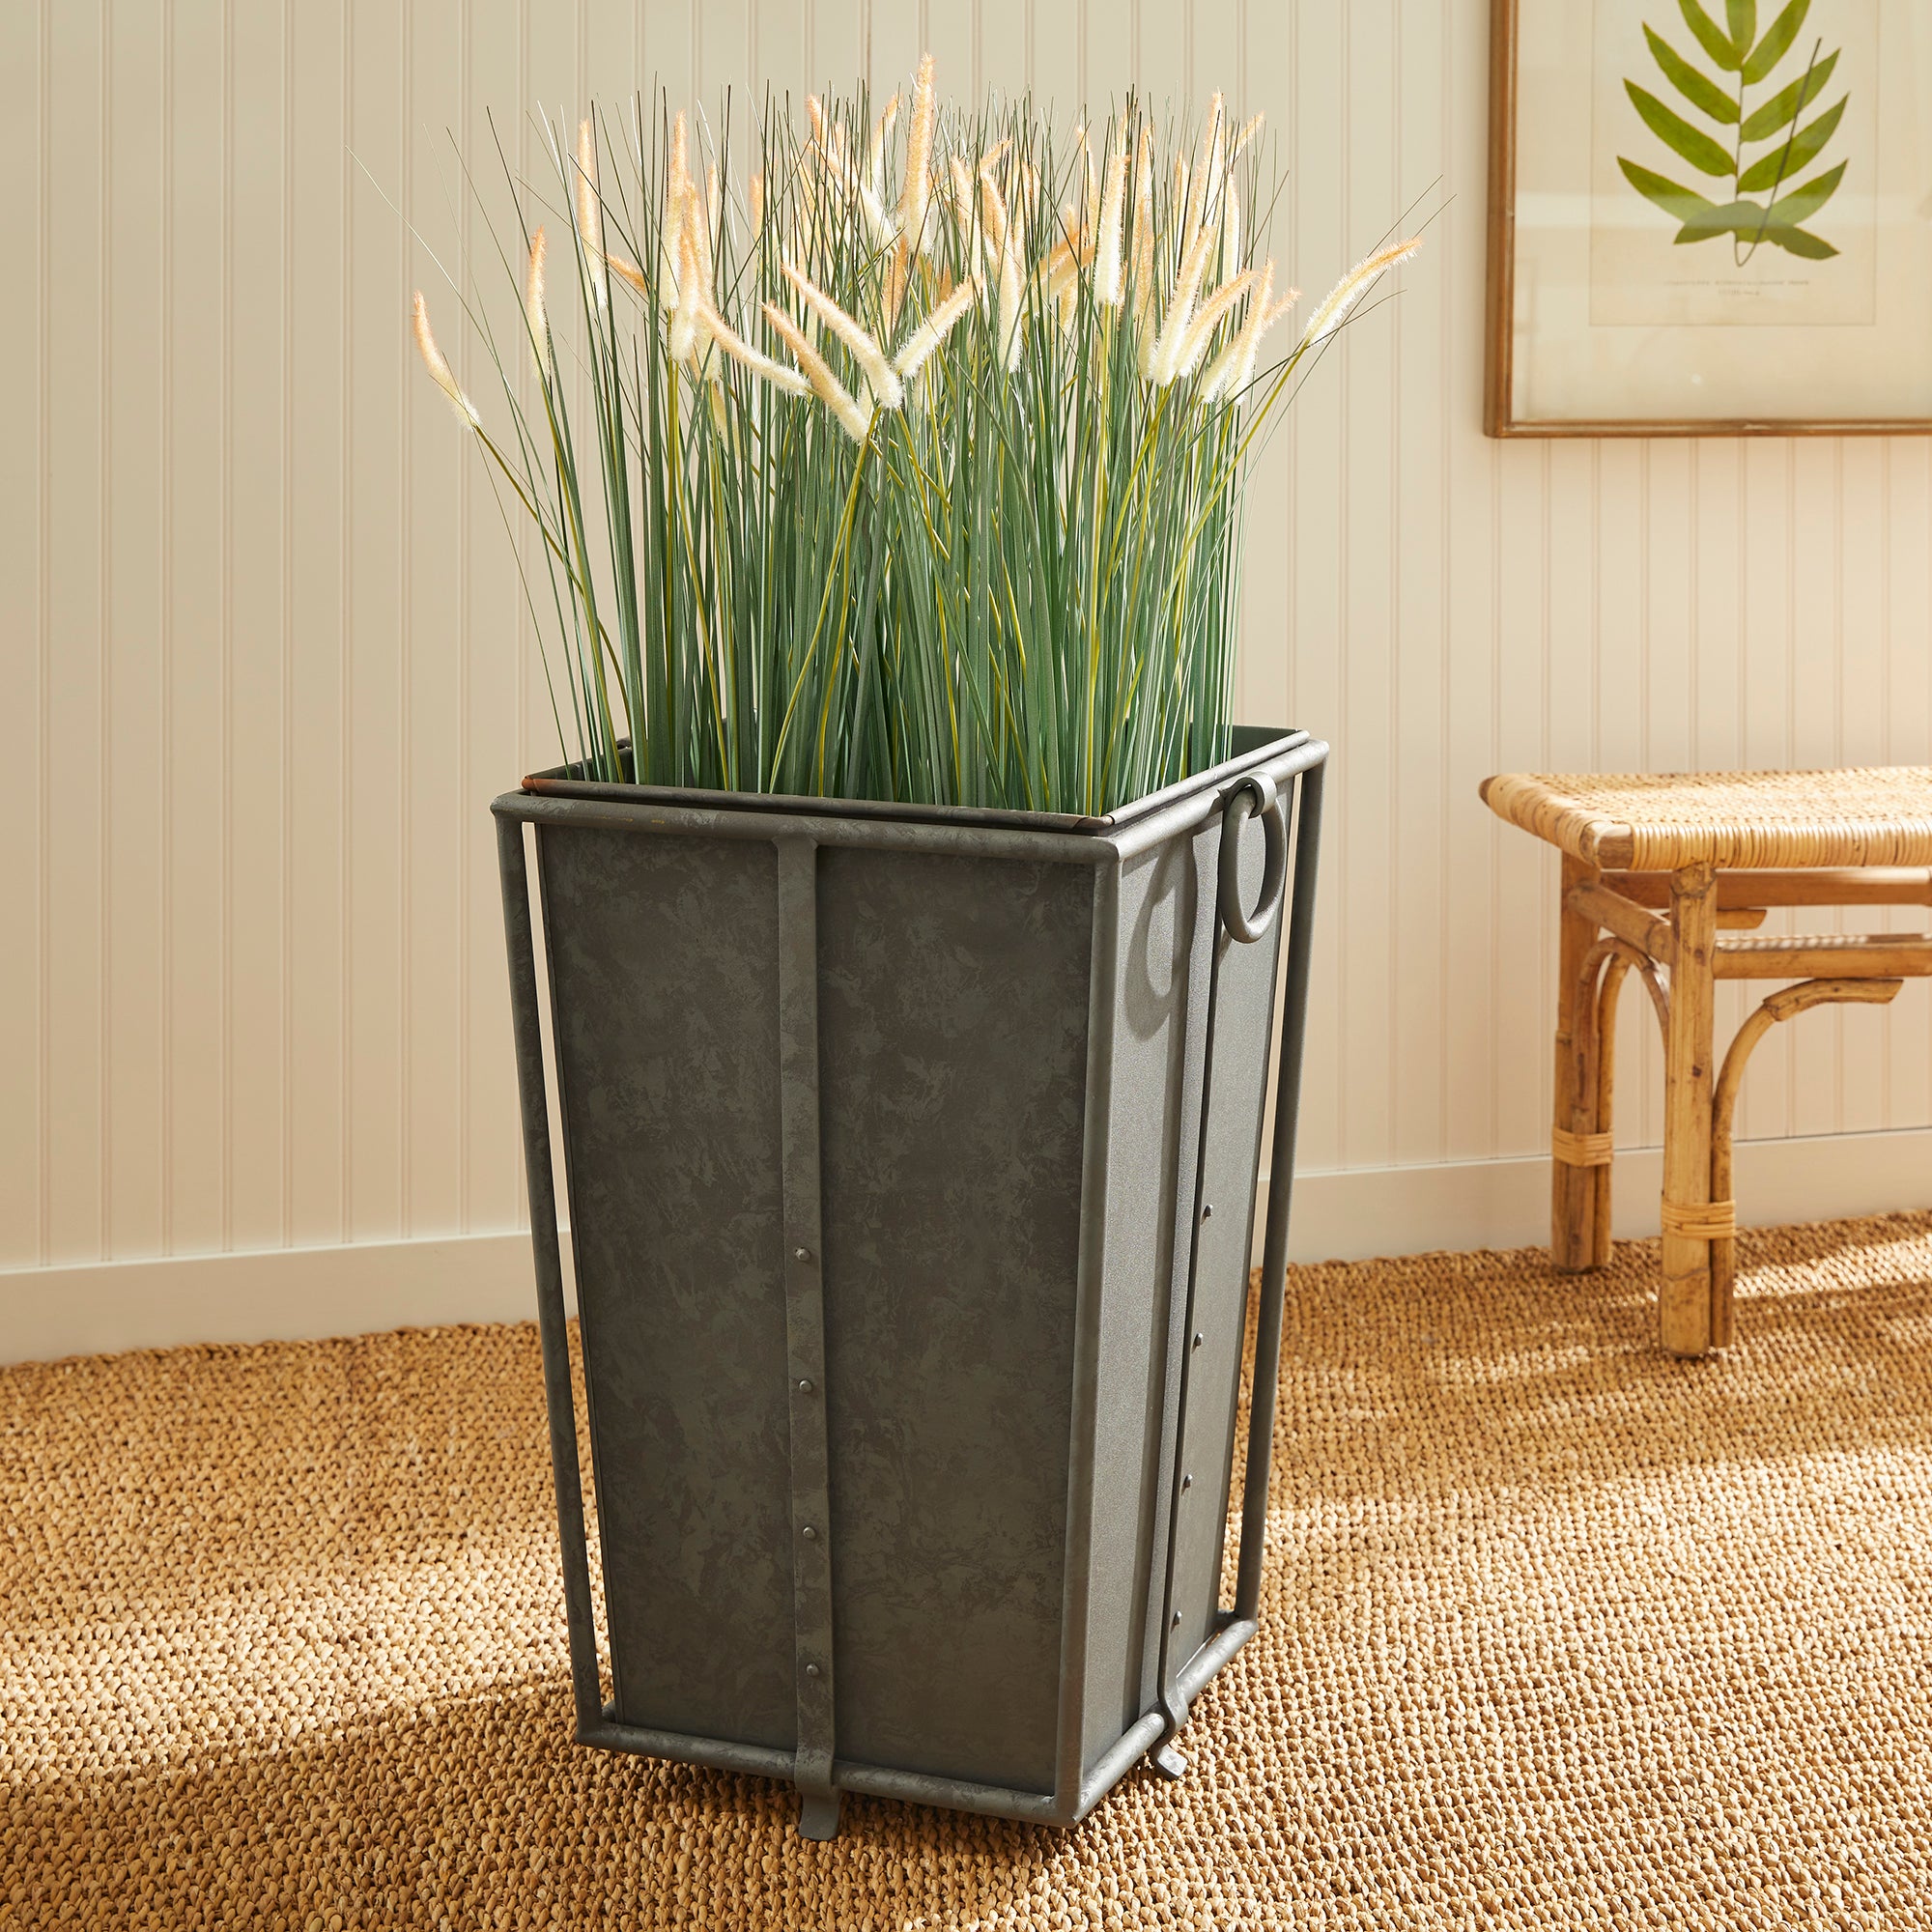 With metal liners that easily slide out, the Callahan Tapered Planter is as practical as it is handsome. The rounded handles and traditional design make it an outdoor classic. Amethyst Home provides interior design, new construction, custom furniture, and area rugs in the Miami metro area.